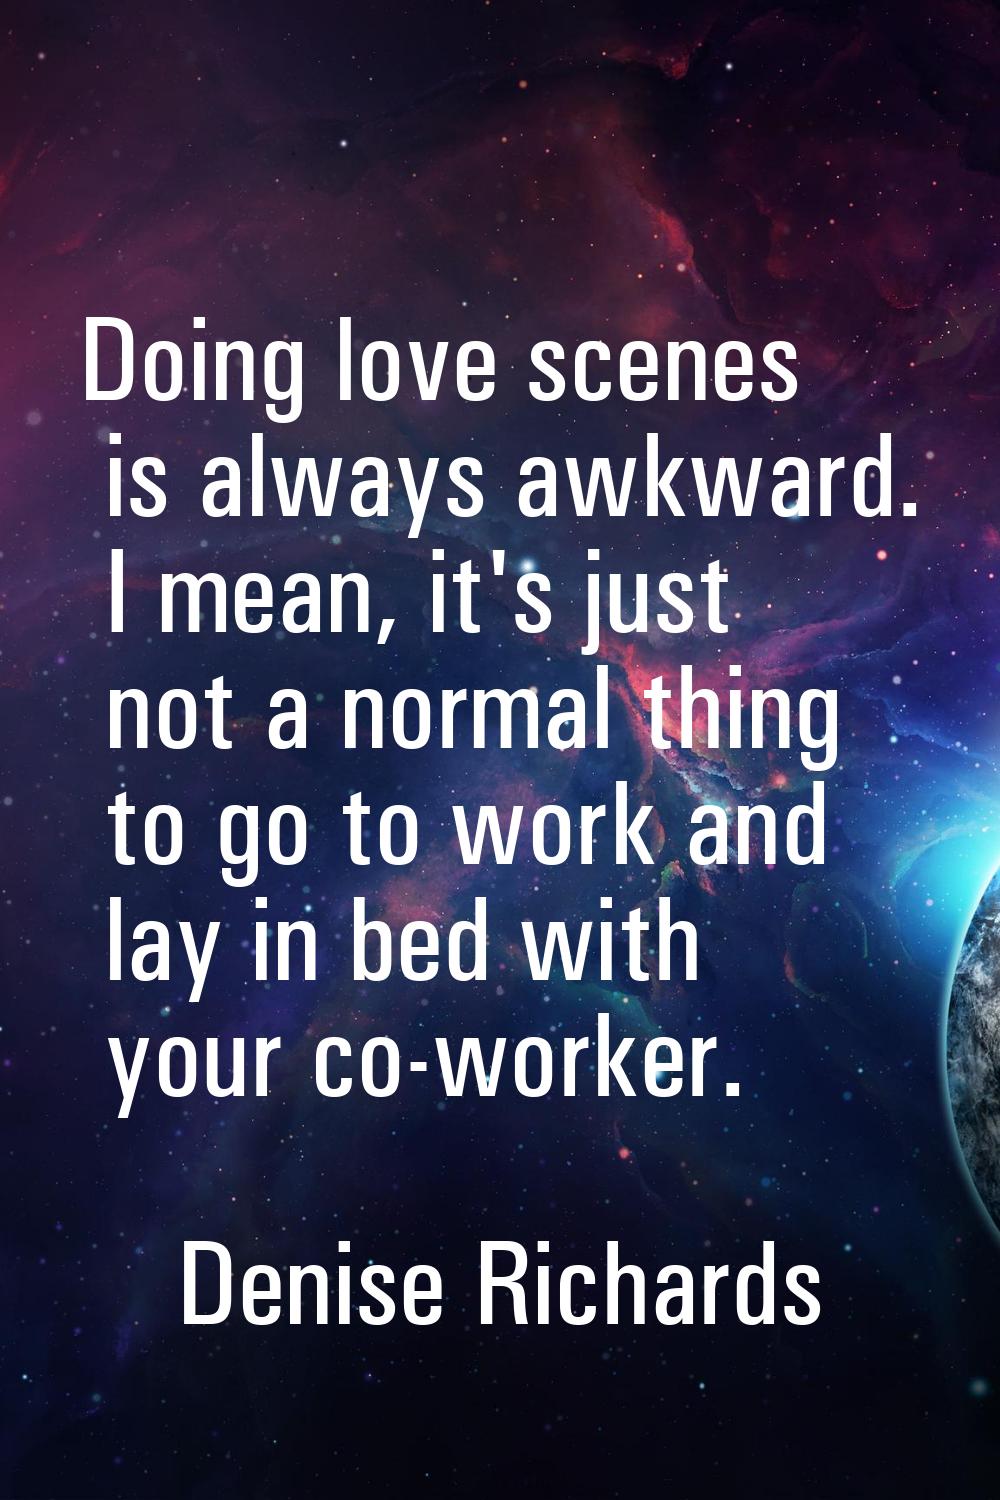 Doing love scenes is always awkward. I mean, it's just not a normal thing to go to work and lay in 